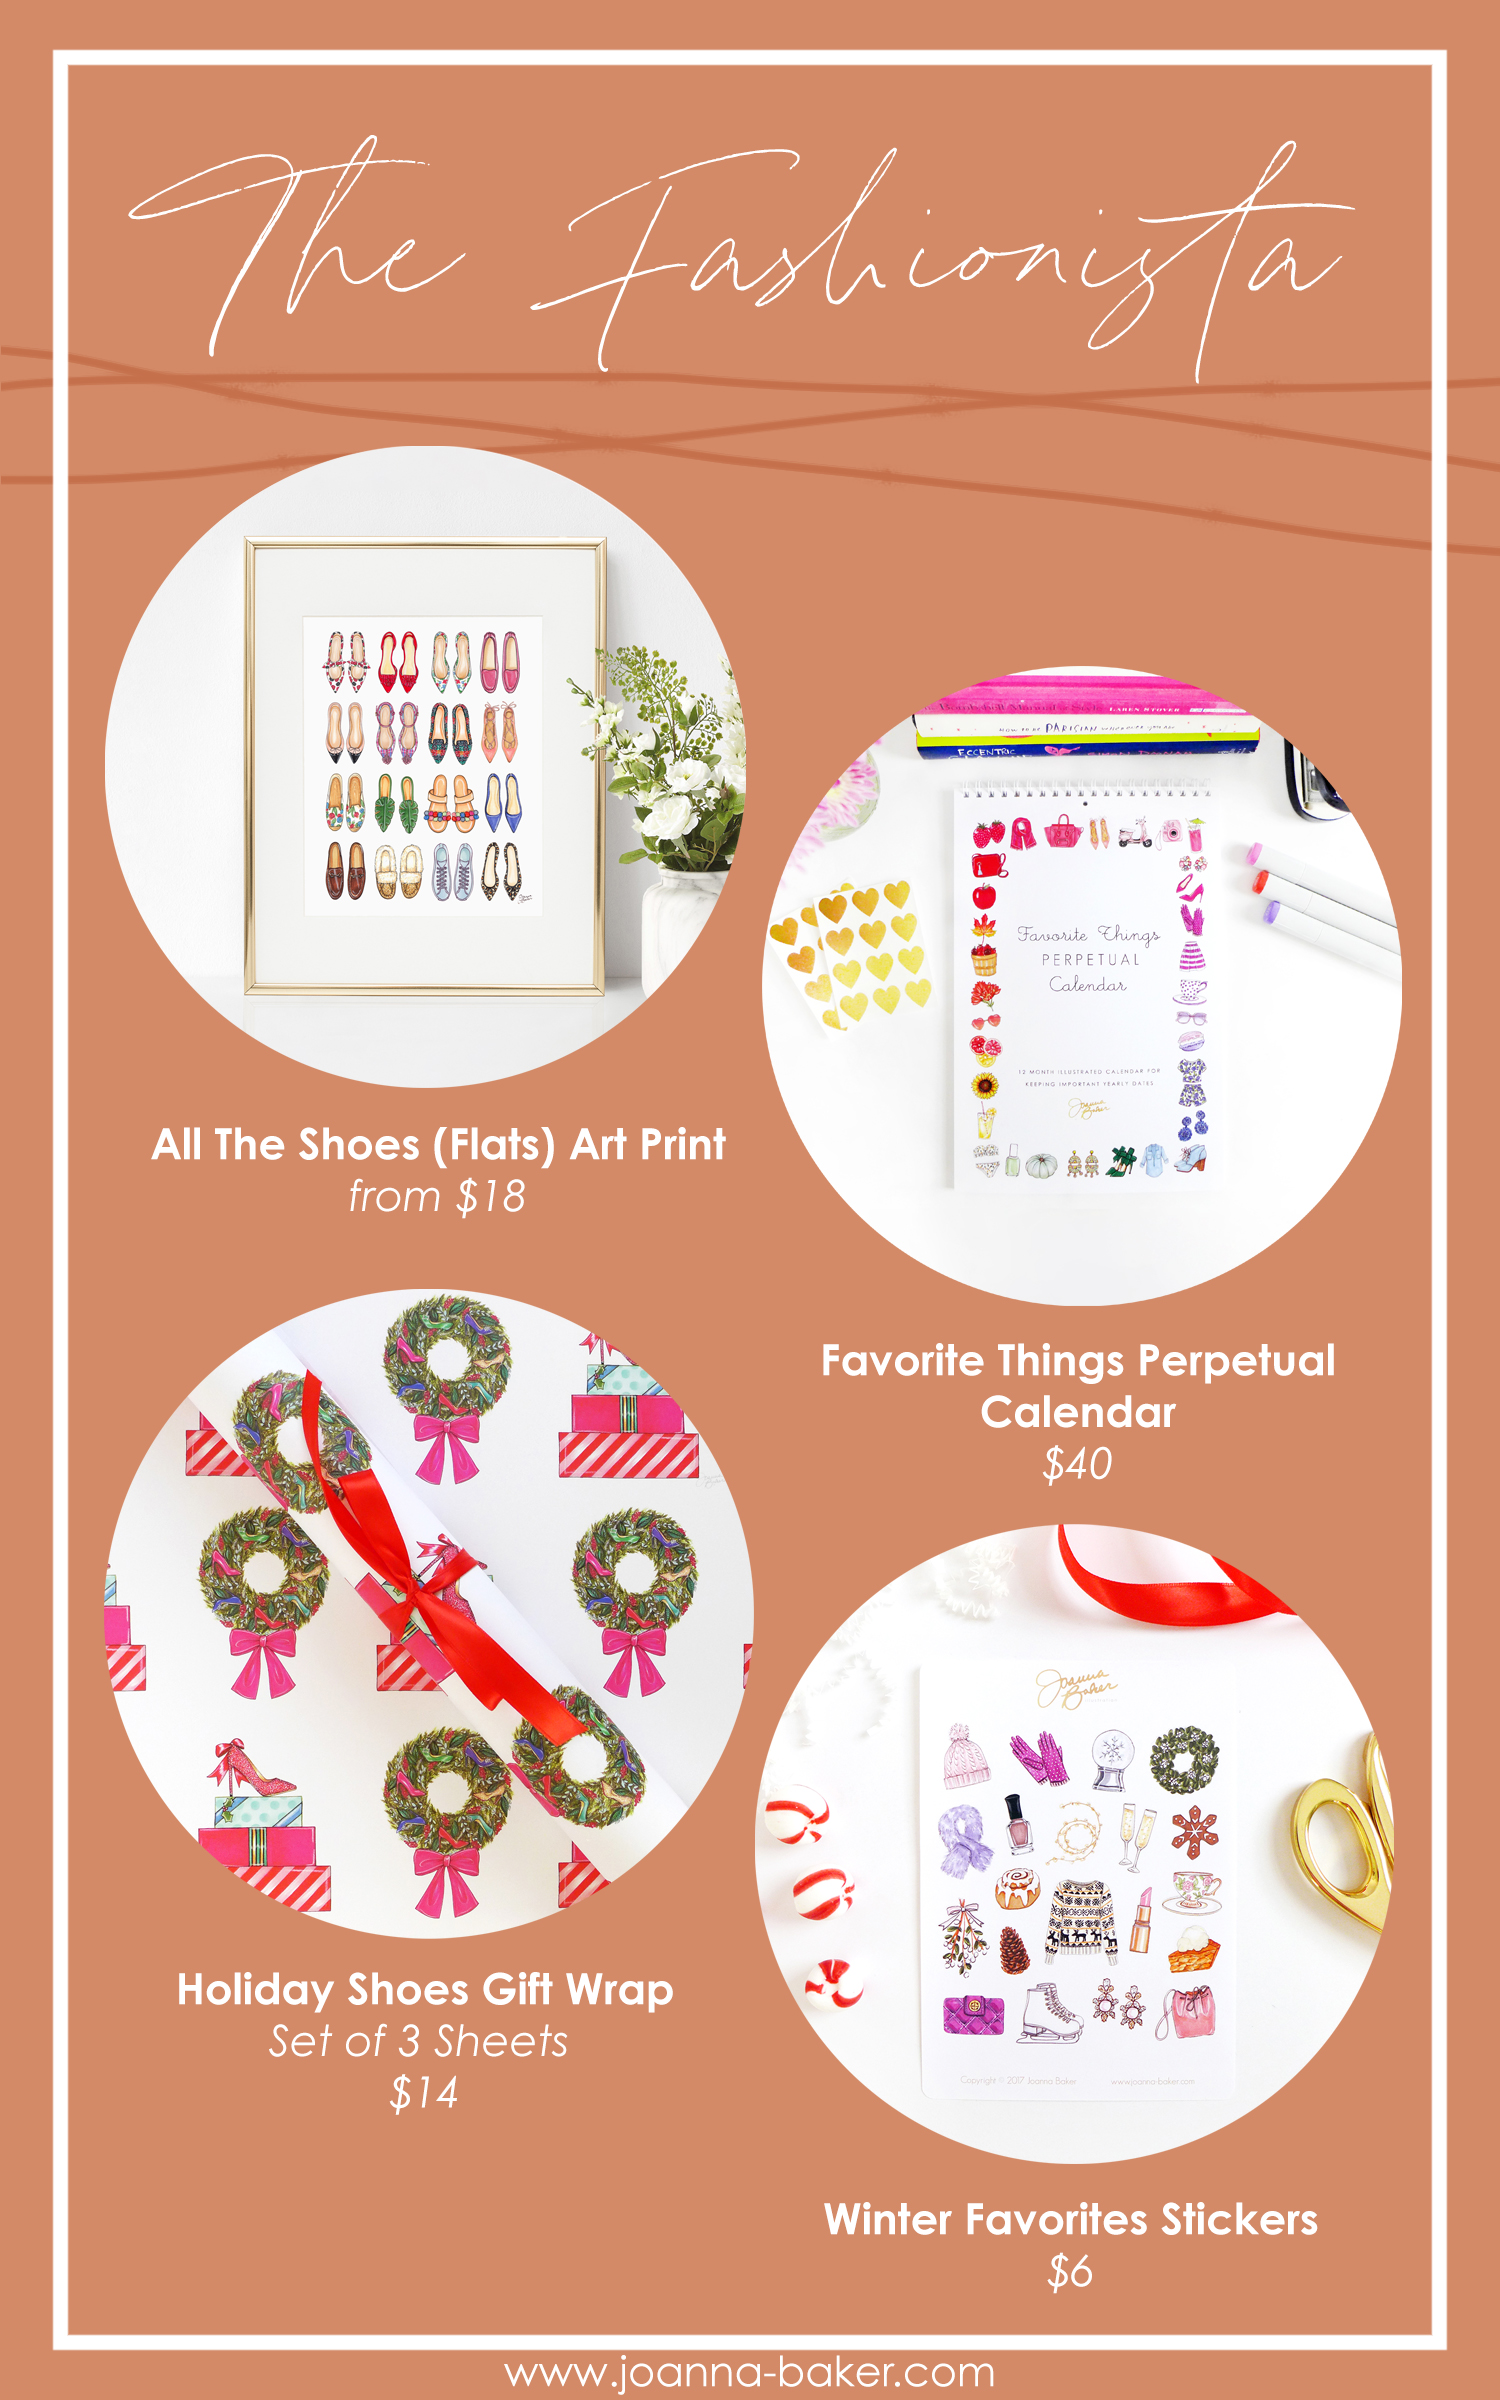 2020 Illustrated Gift Guide for The Fashionista by Joanna Baker Illustration